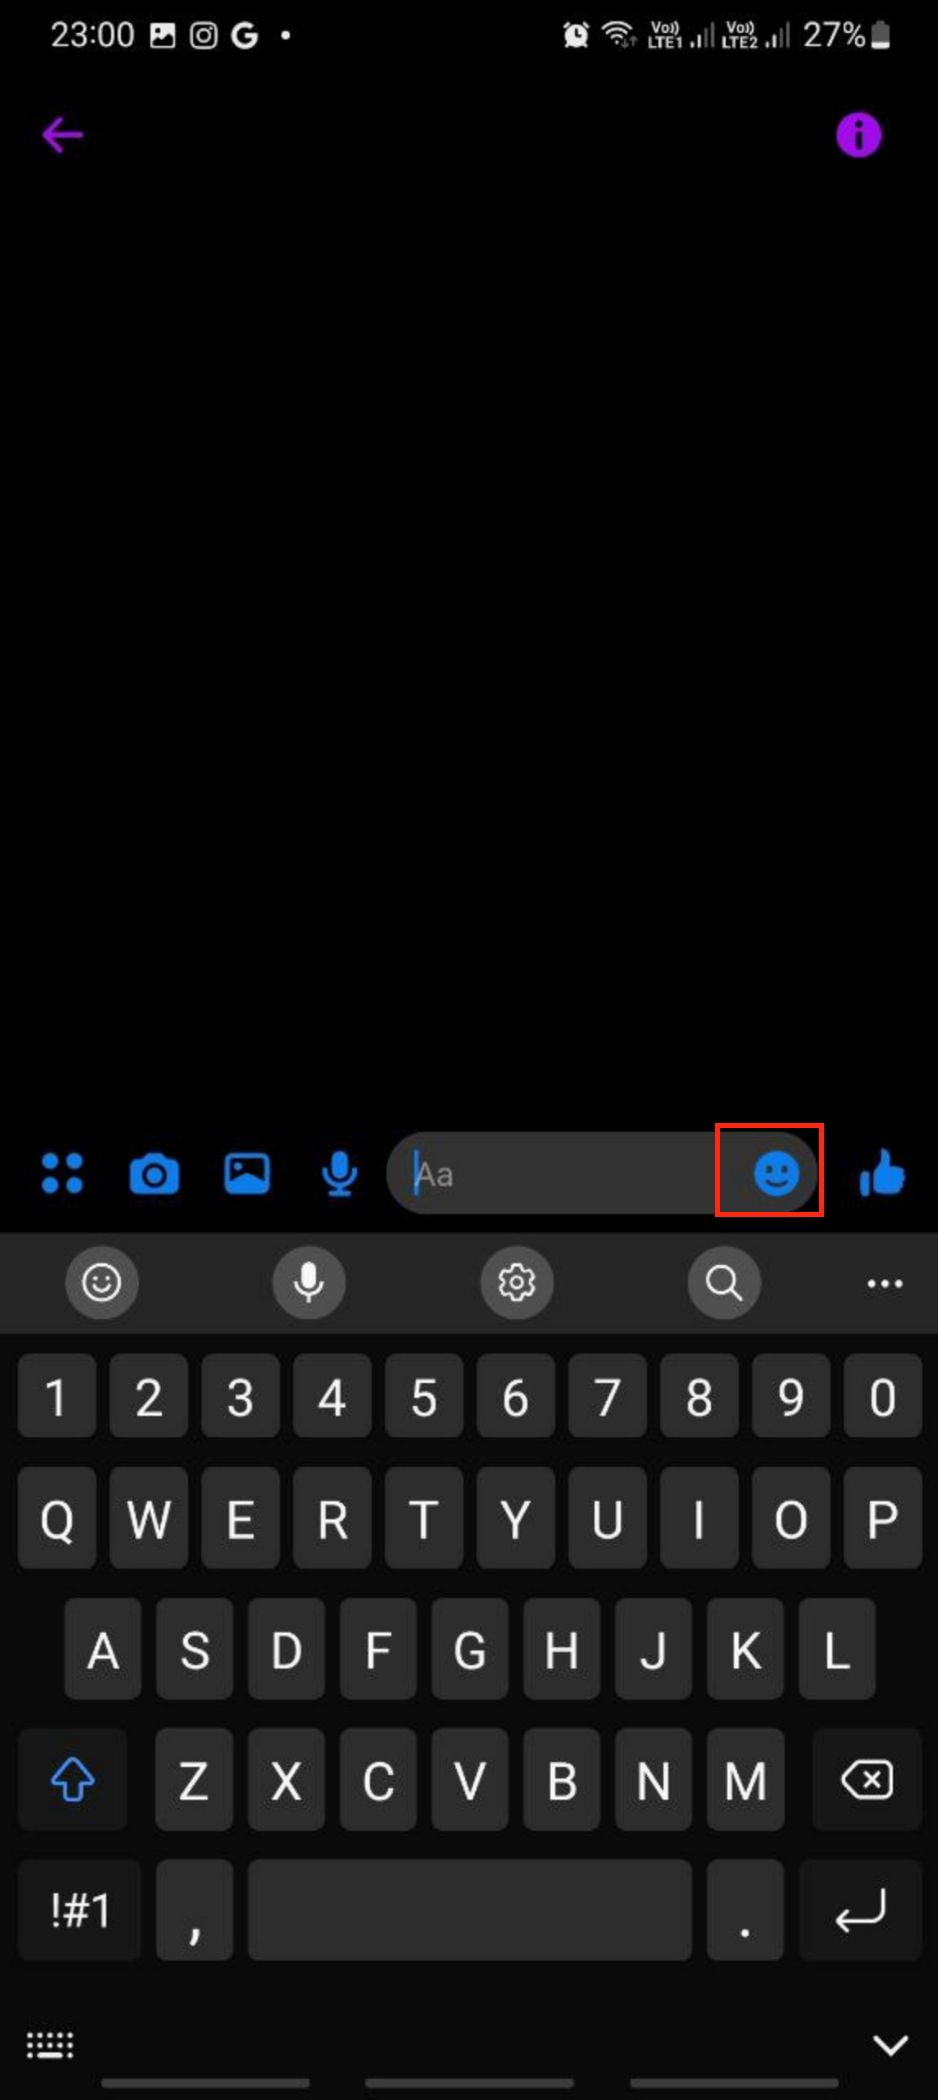 How to Send Soundmojis on Facebook Messenger using Android 